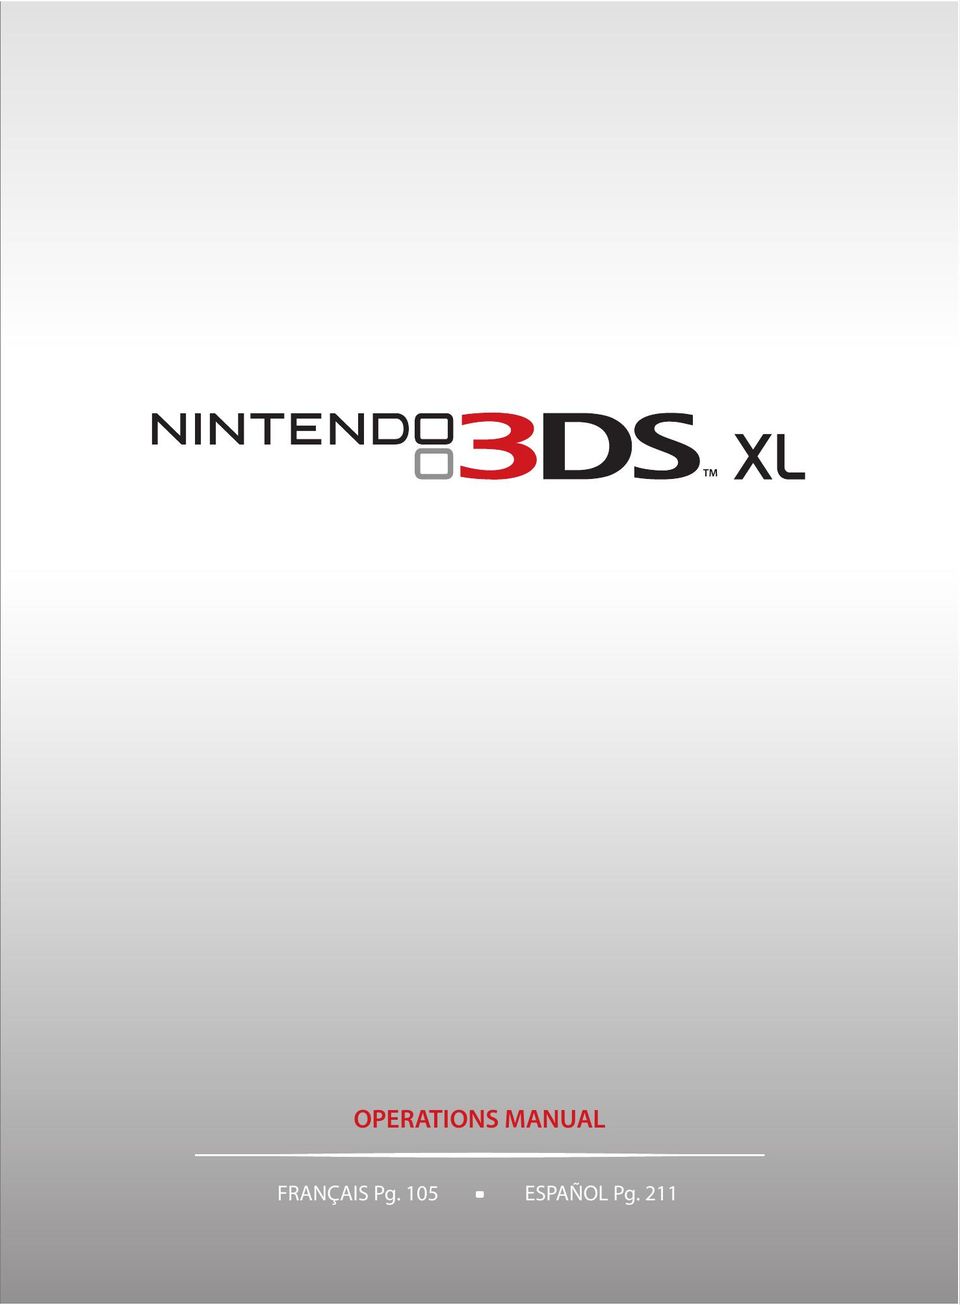 Nintendo 3DS XL Handheld Game System User Manual (Page 1)